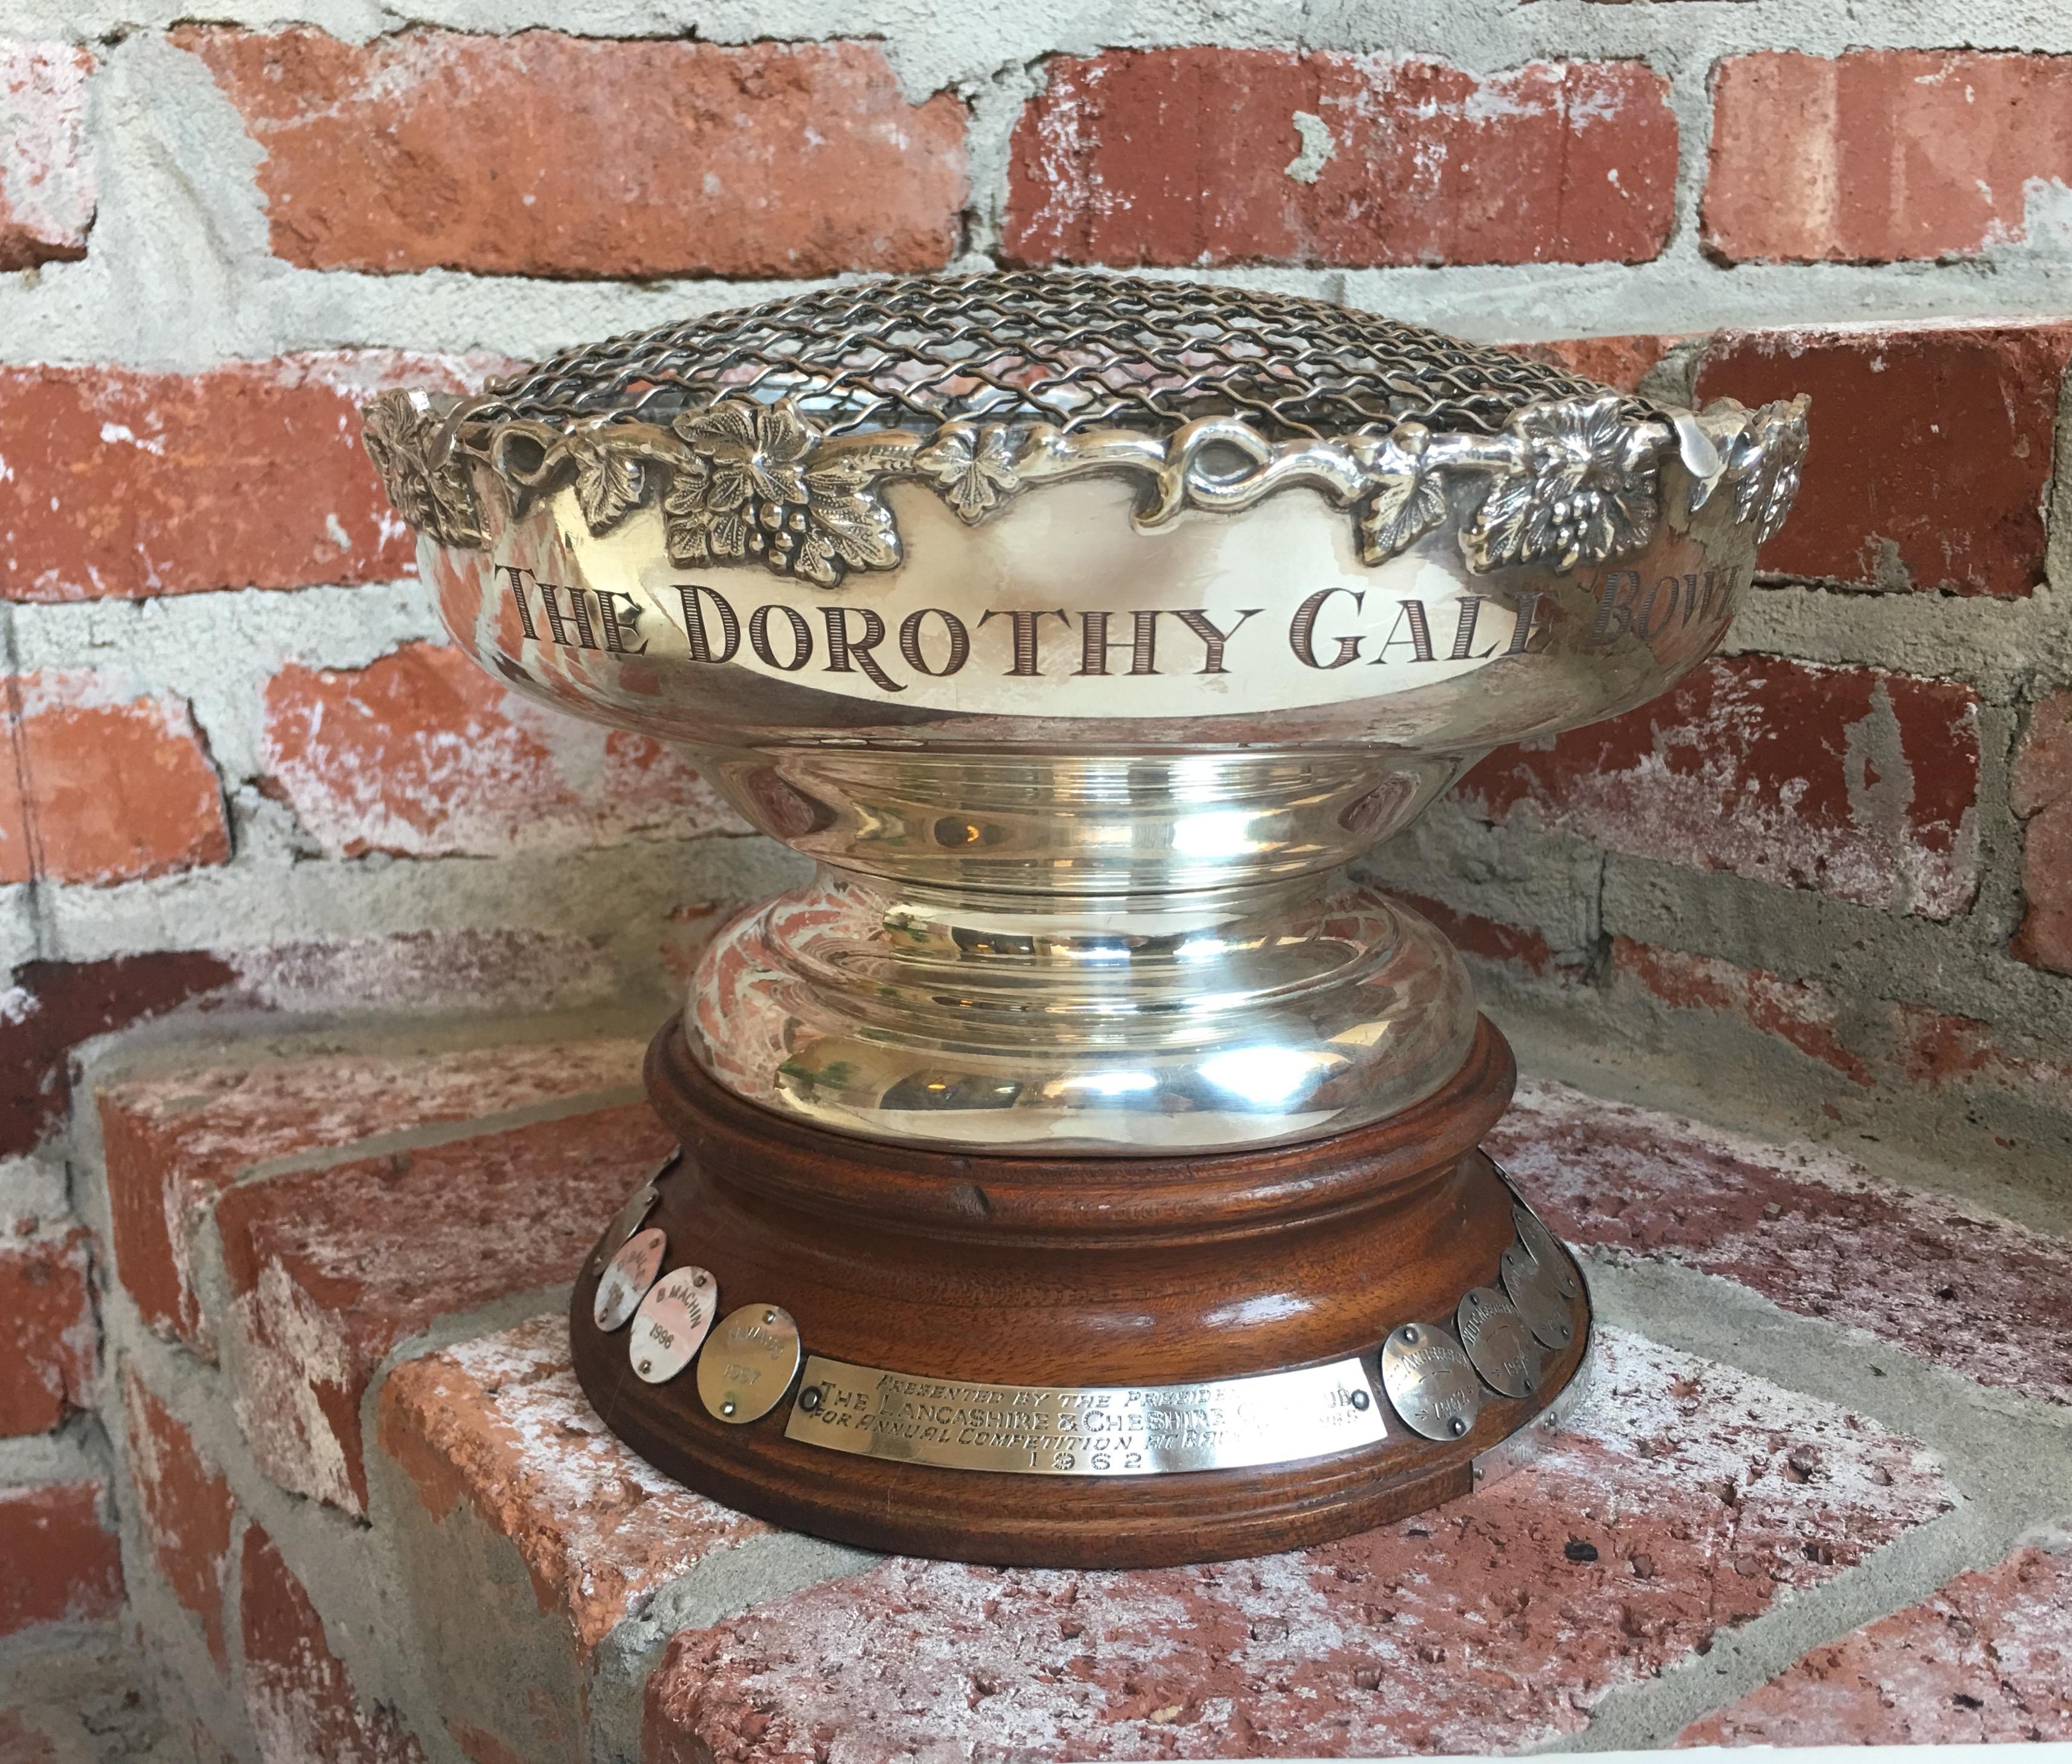 Direct from England, this amazing ‘bowl’ trophy was named the “Dorothy Gale Bowl”, although I don’t know anything of the name’s origin.
~The bowl has gorgeous fruit & foliage trim around the edge as well as it’s original removable insert that would